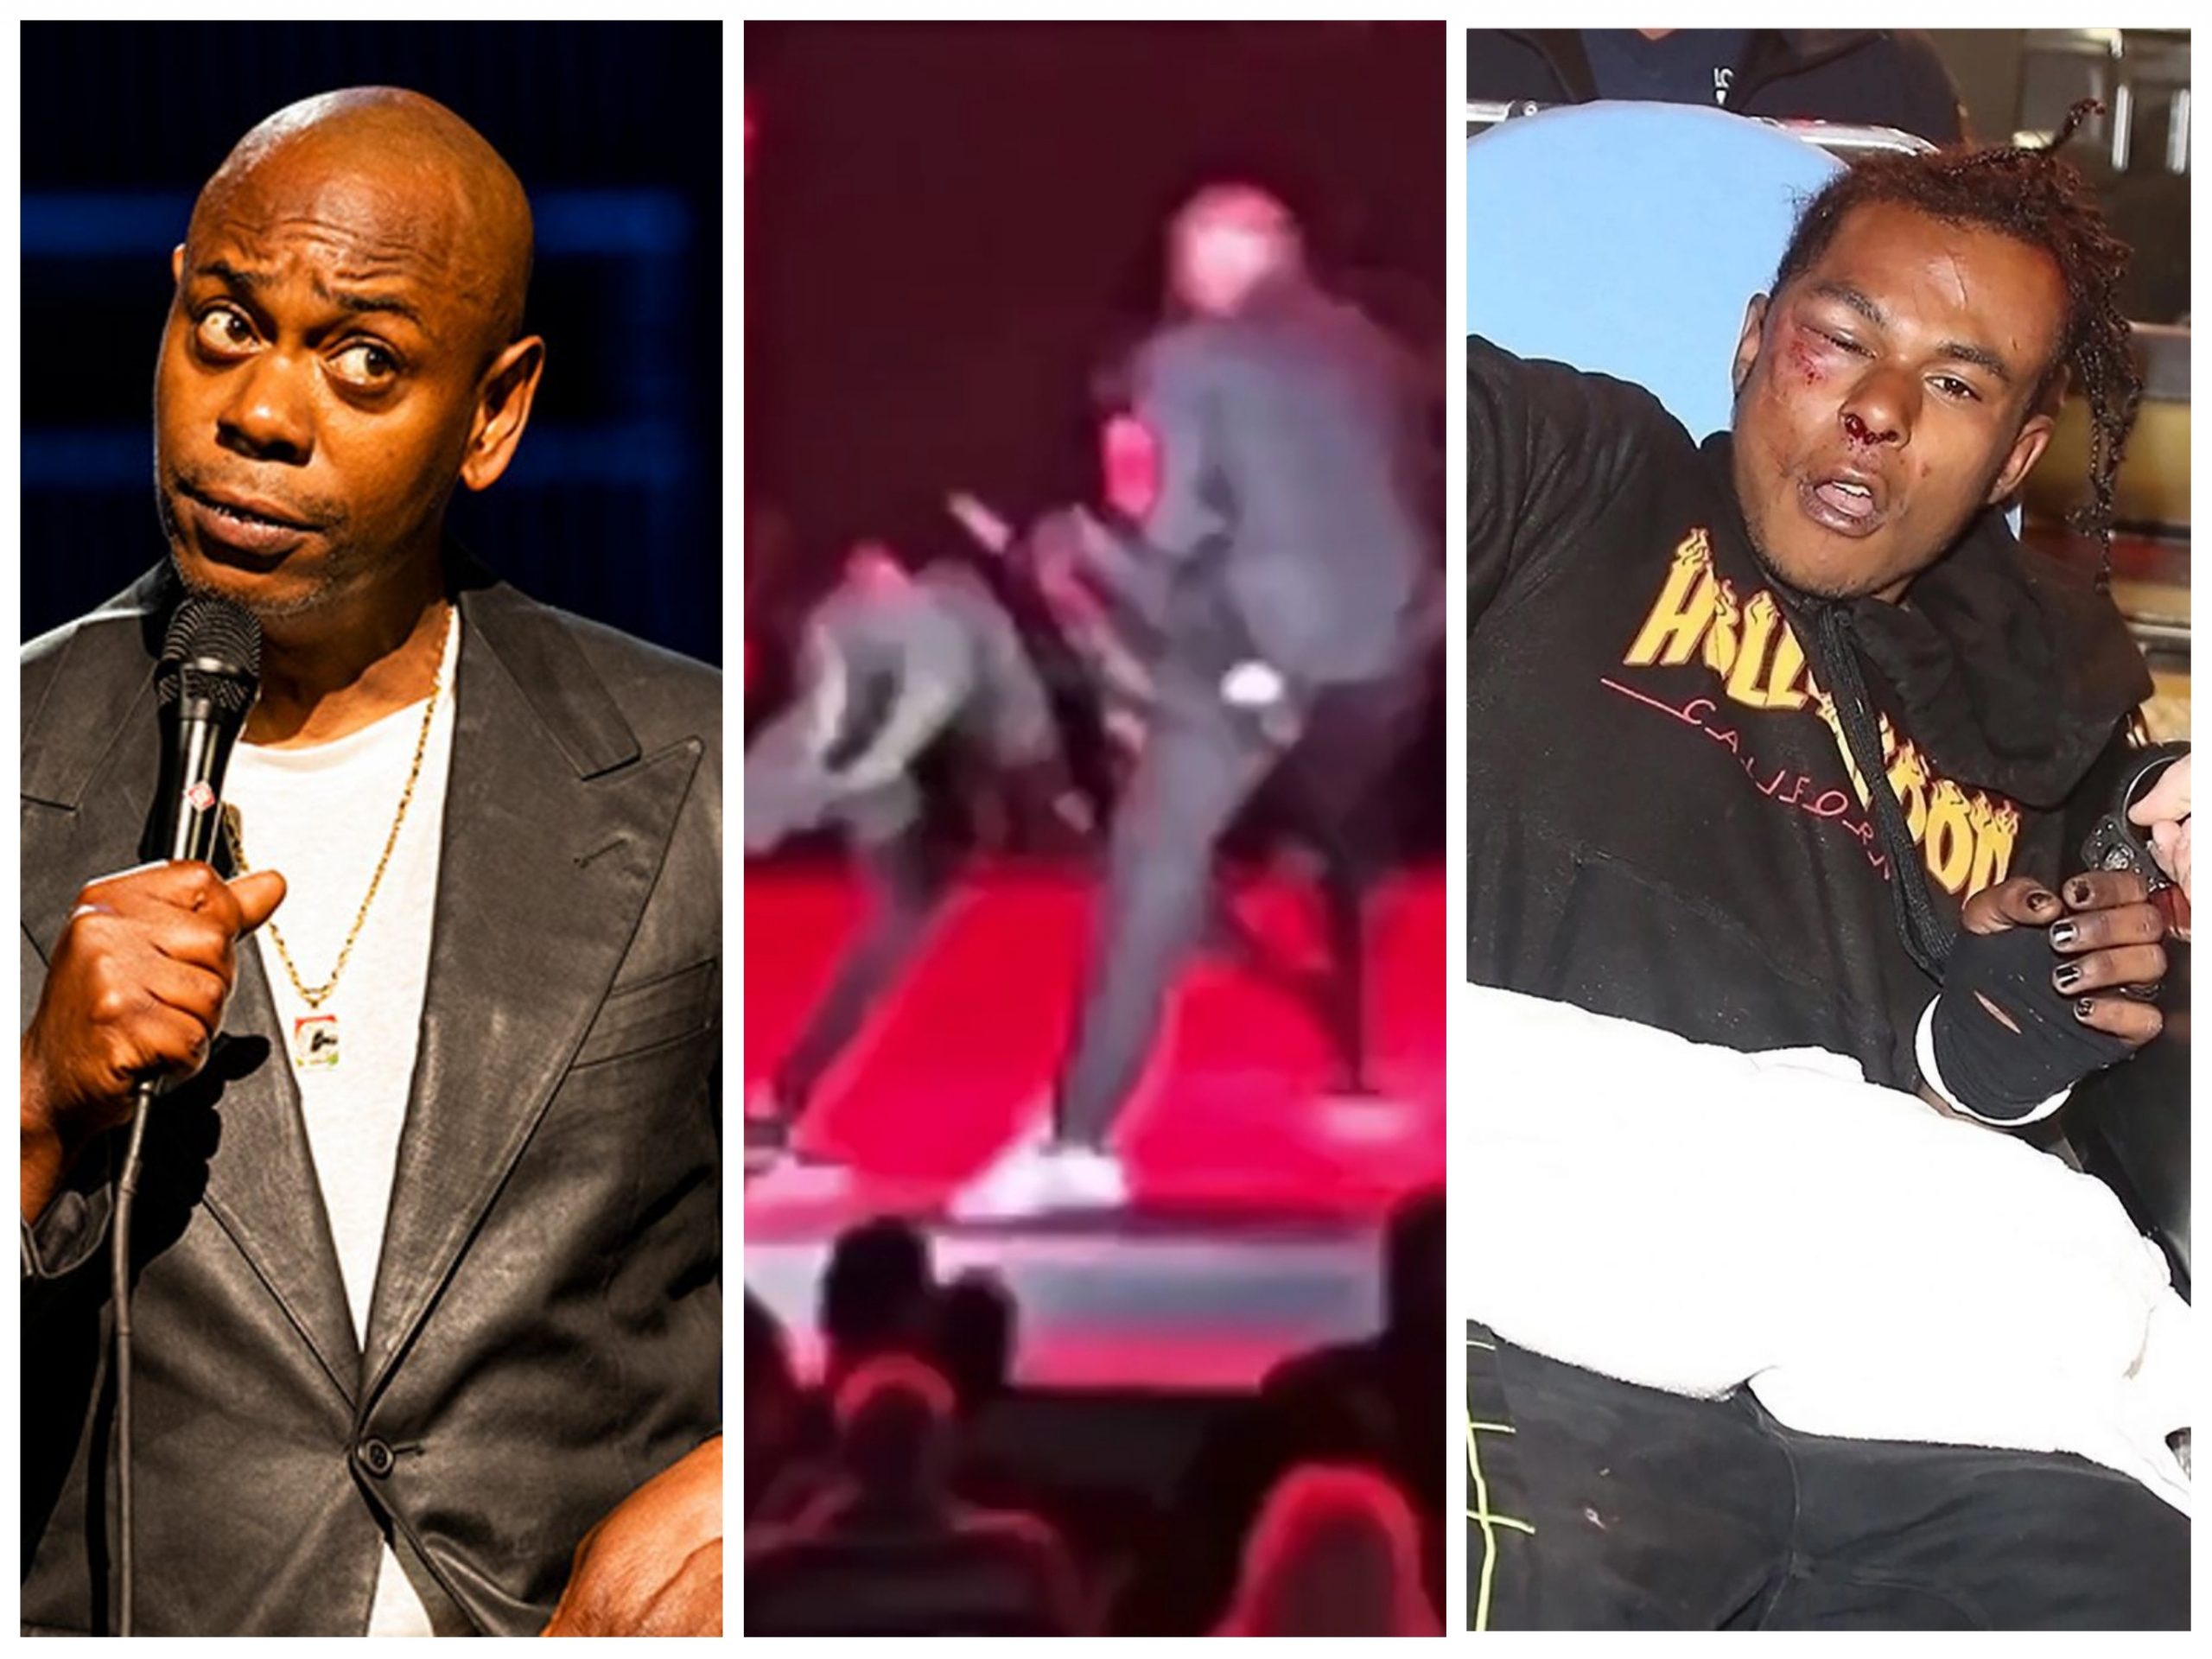 Dave Chappelle Attacked While Performing On Stage At The Hollywood Bowl